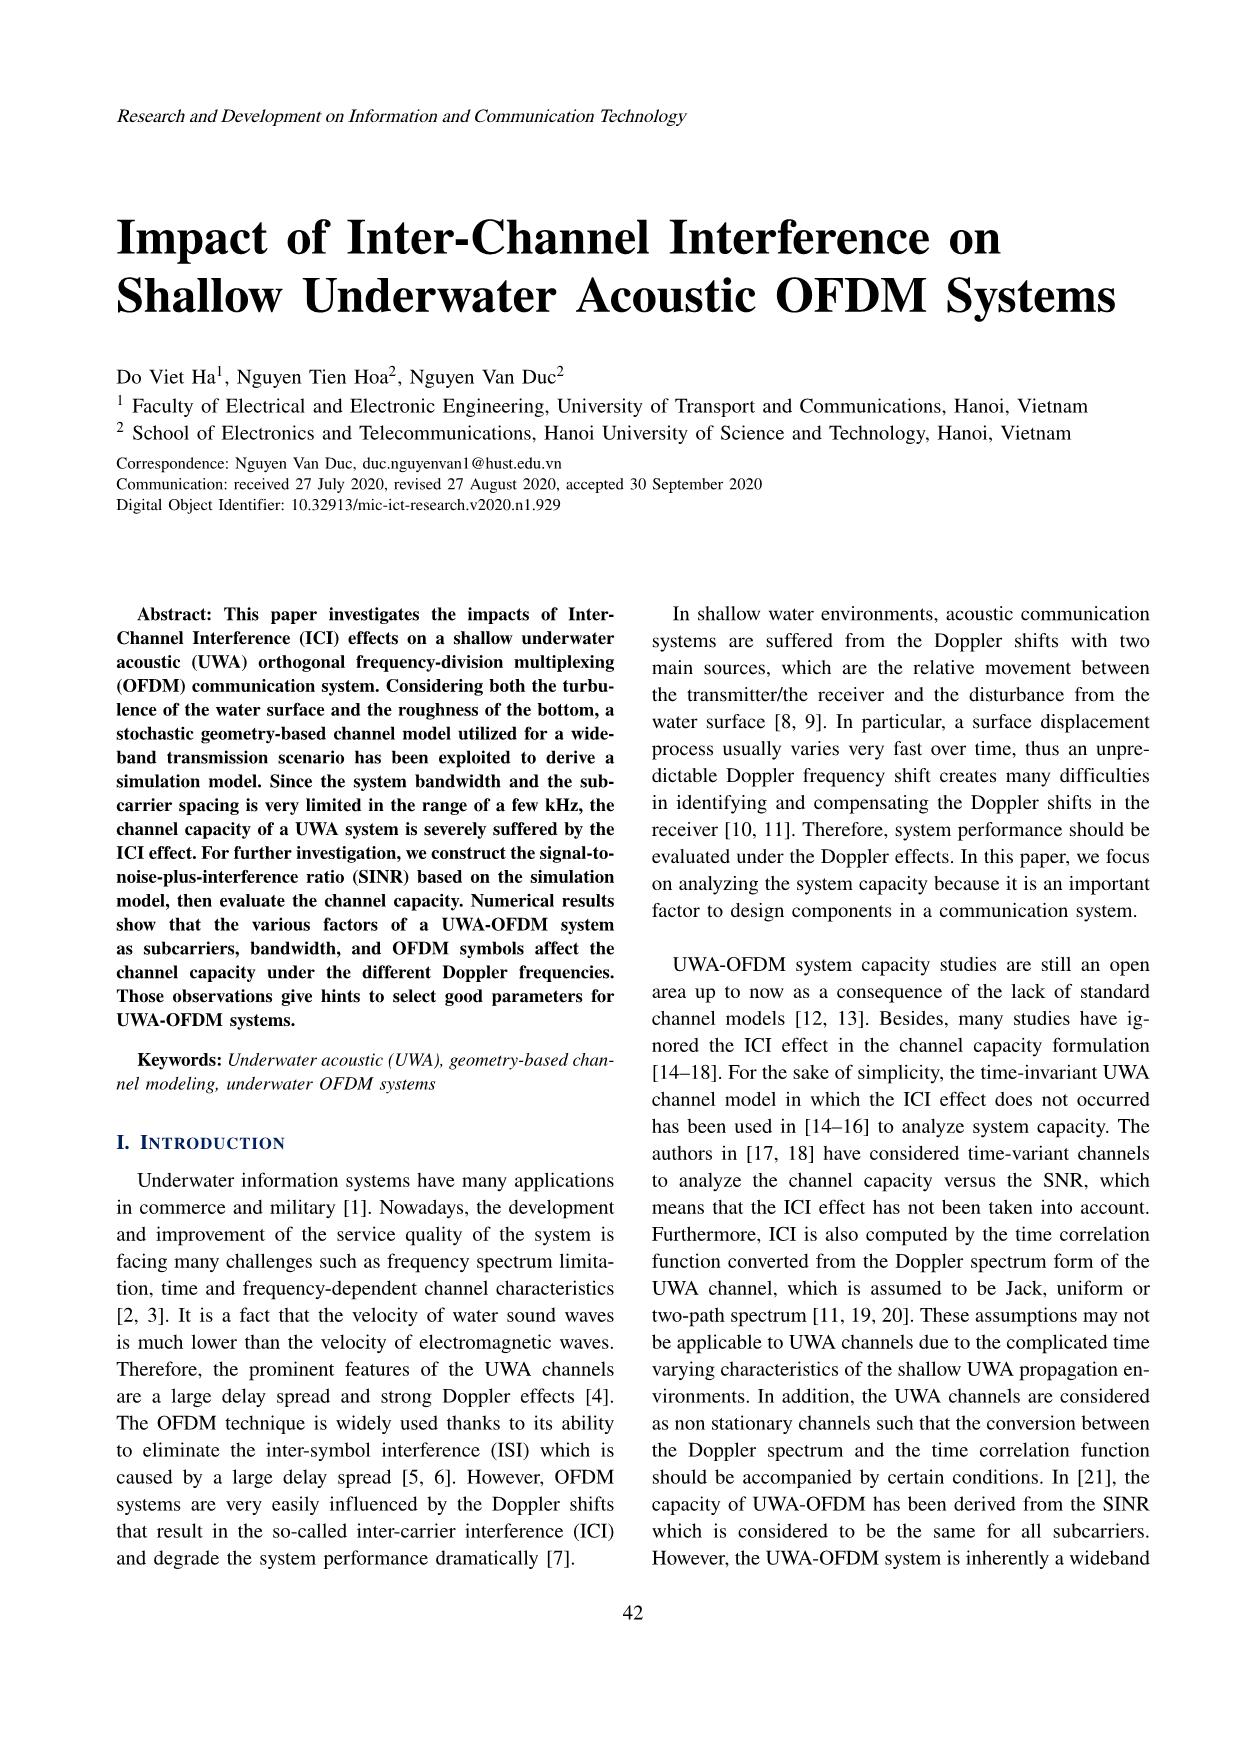 Impact of inter-channel interference on shallow underwater acoustic ofdm systems trang 1